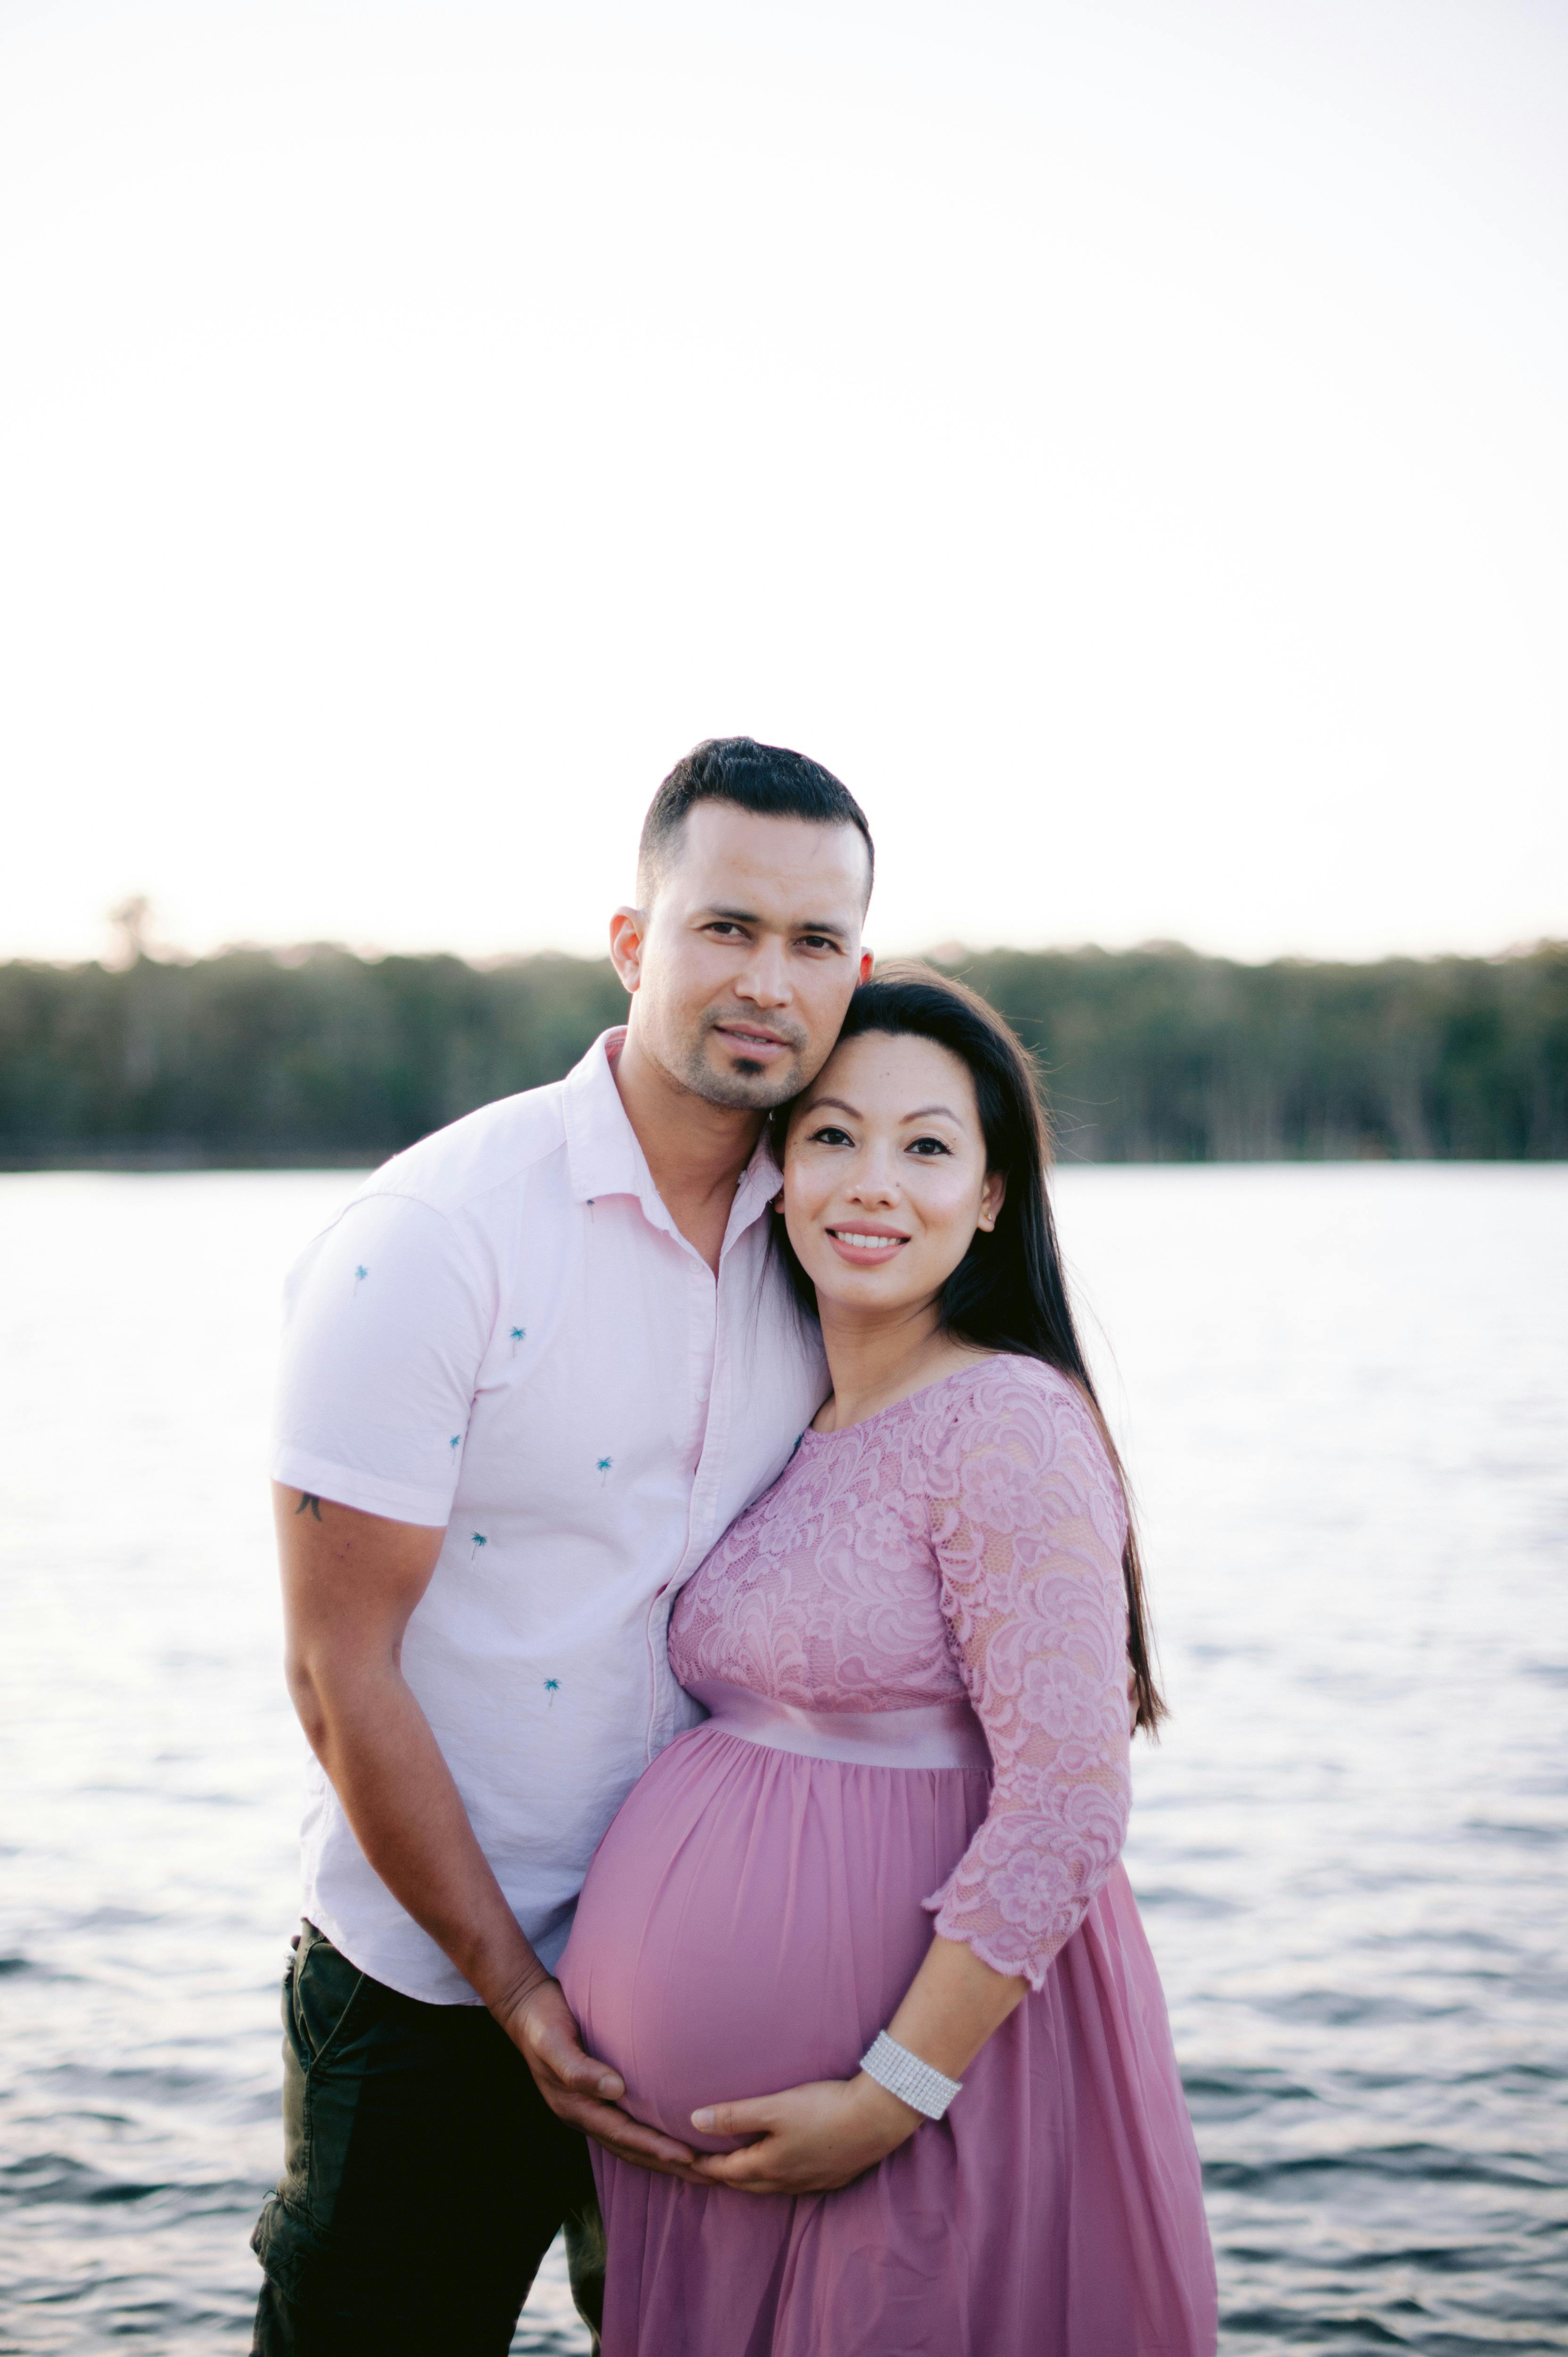 Outdoor Maternity Photoshoot for pregnant couple